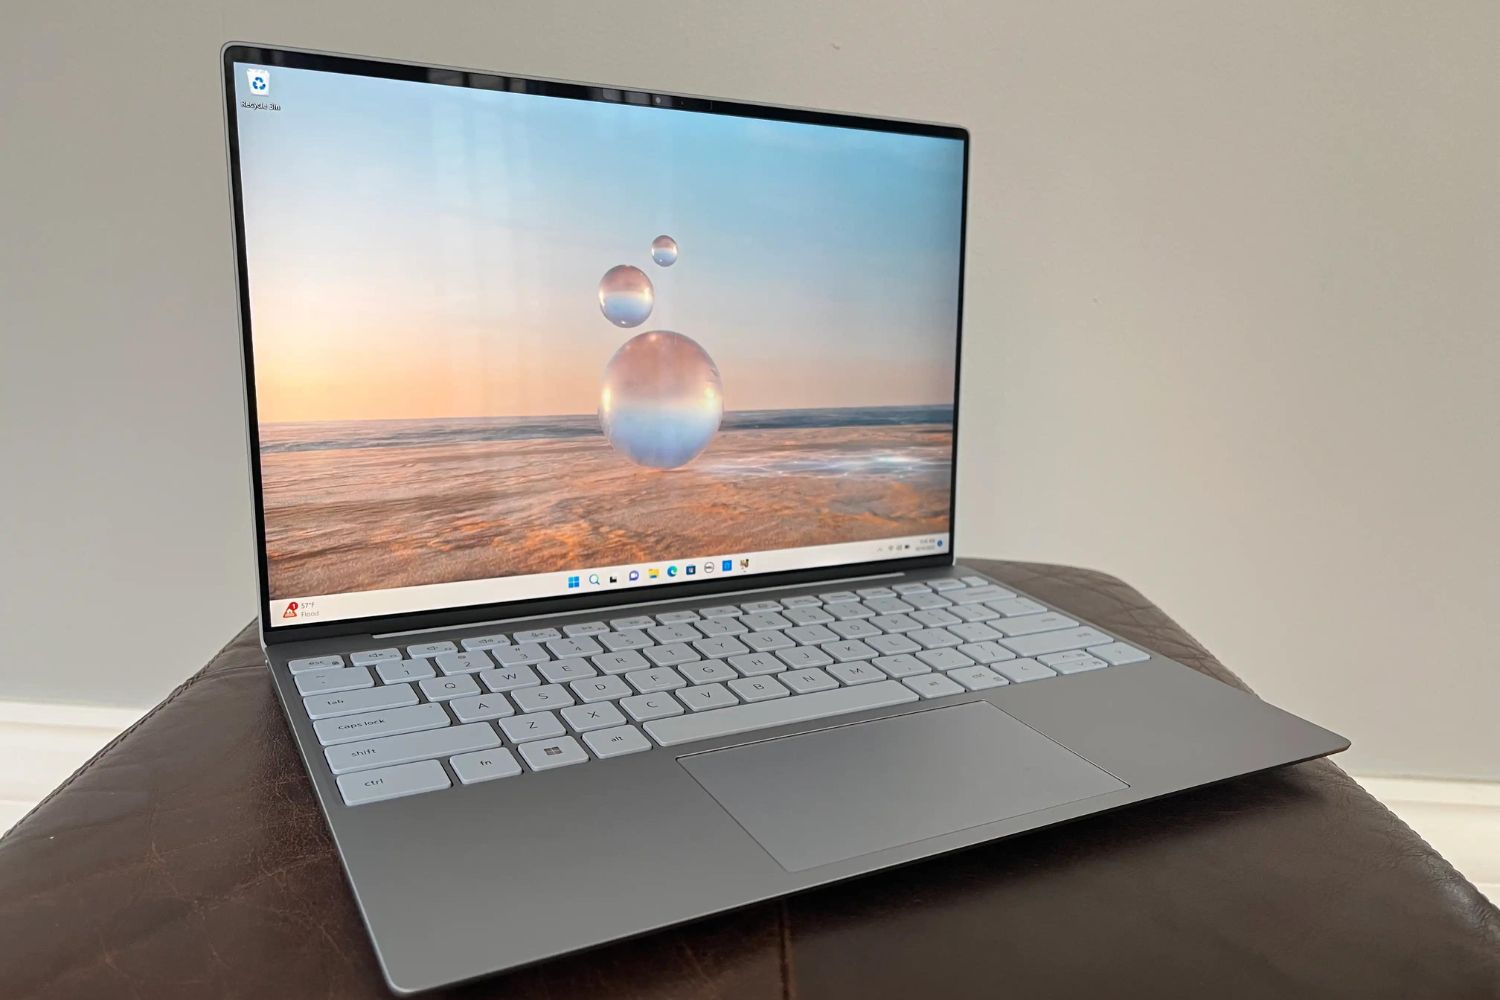 How To Get The Best Price On A Dell XPS 13 Ultrabook